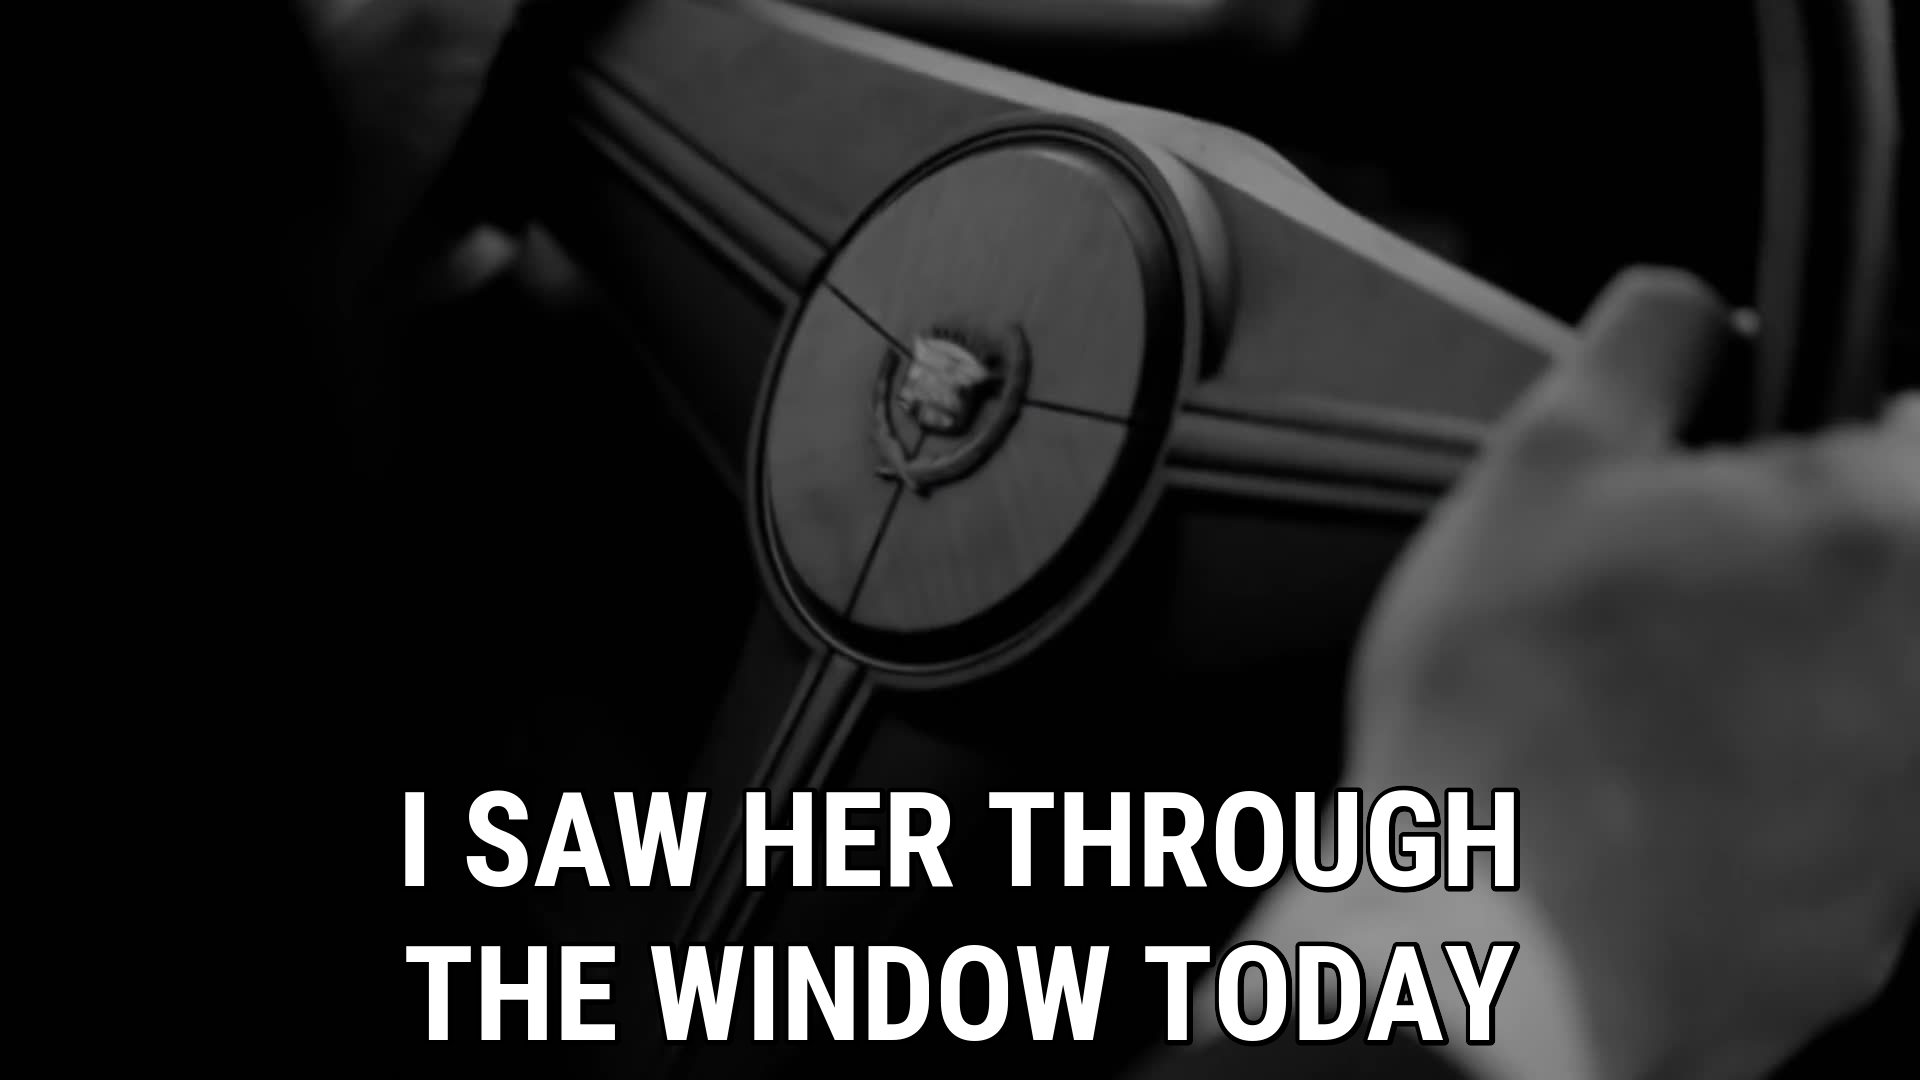 I Saw Her Through The Window Today / Johnny Cash - Johnny Cash She Used To Love Me Lyrics - HD Wallpaper 